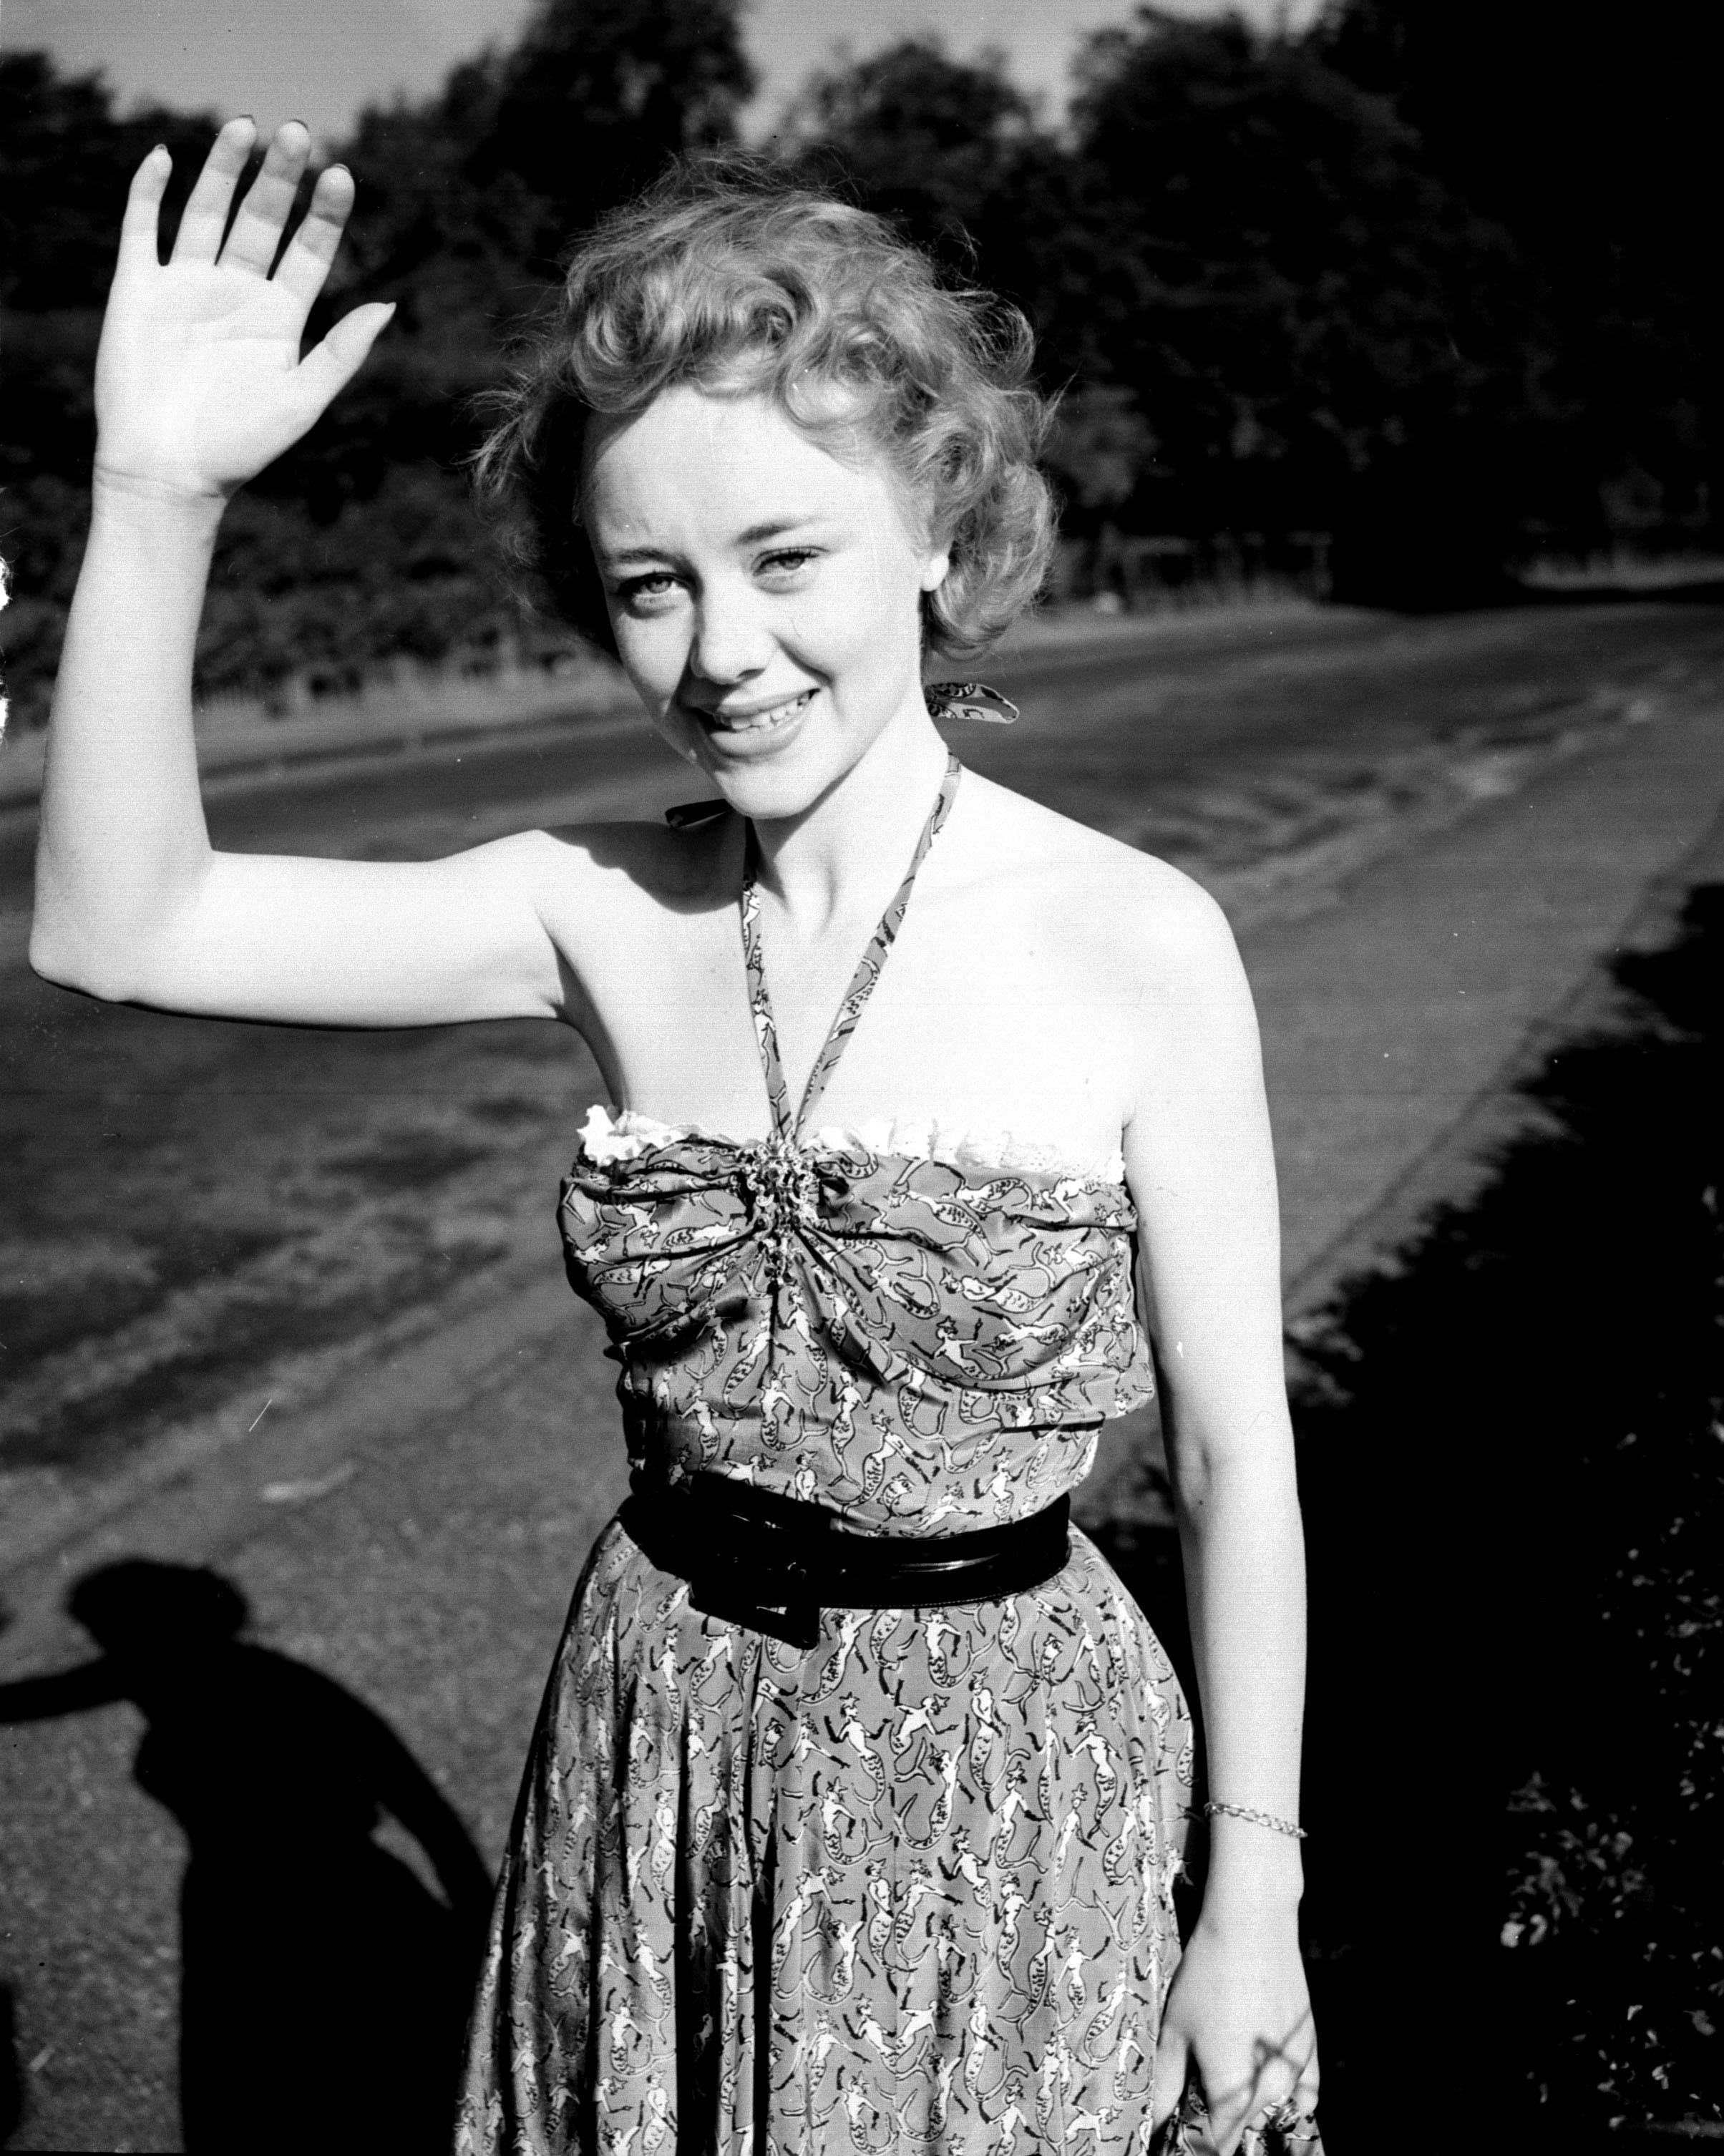 Glynis Johns leaving her home in London, England on July 28, 1949 | Source: Getty Images